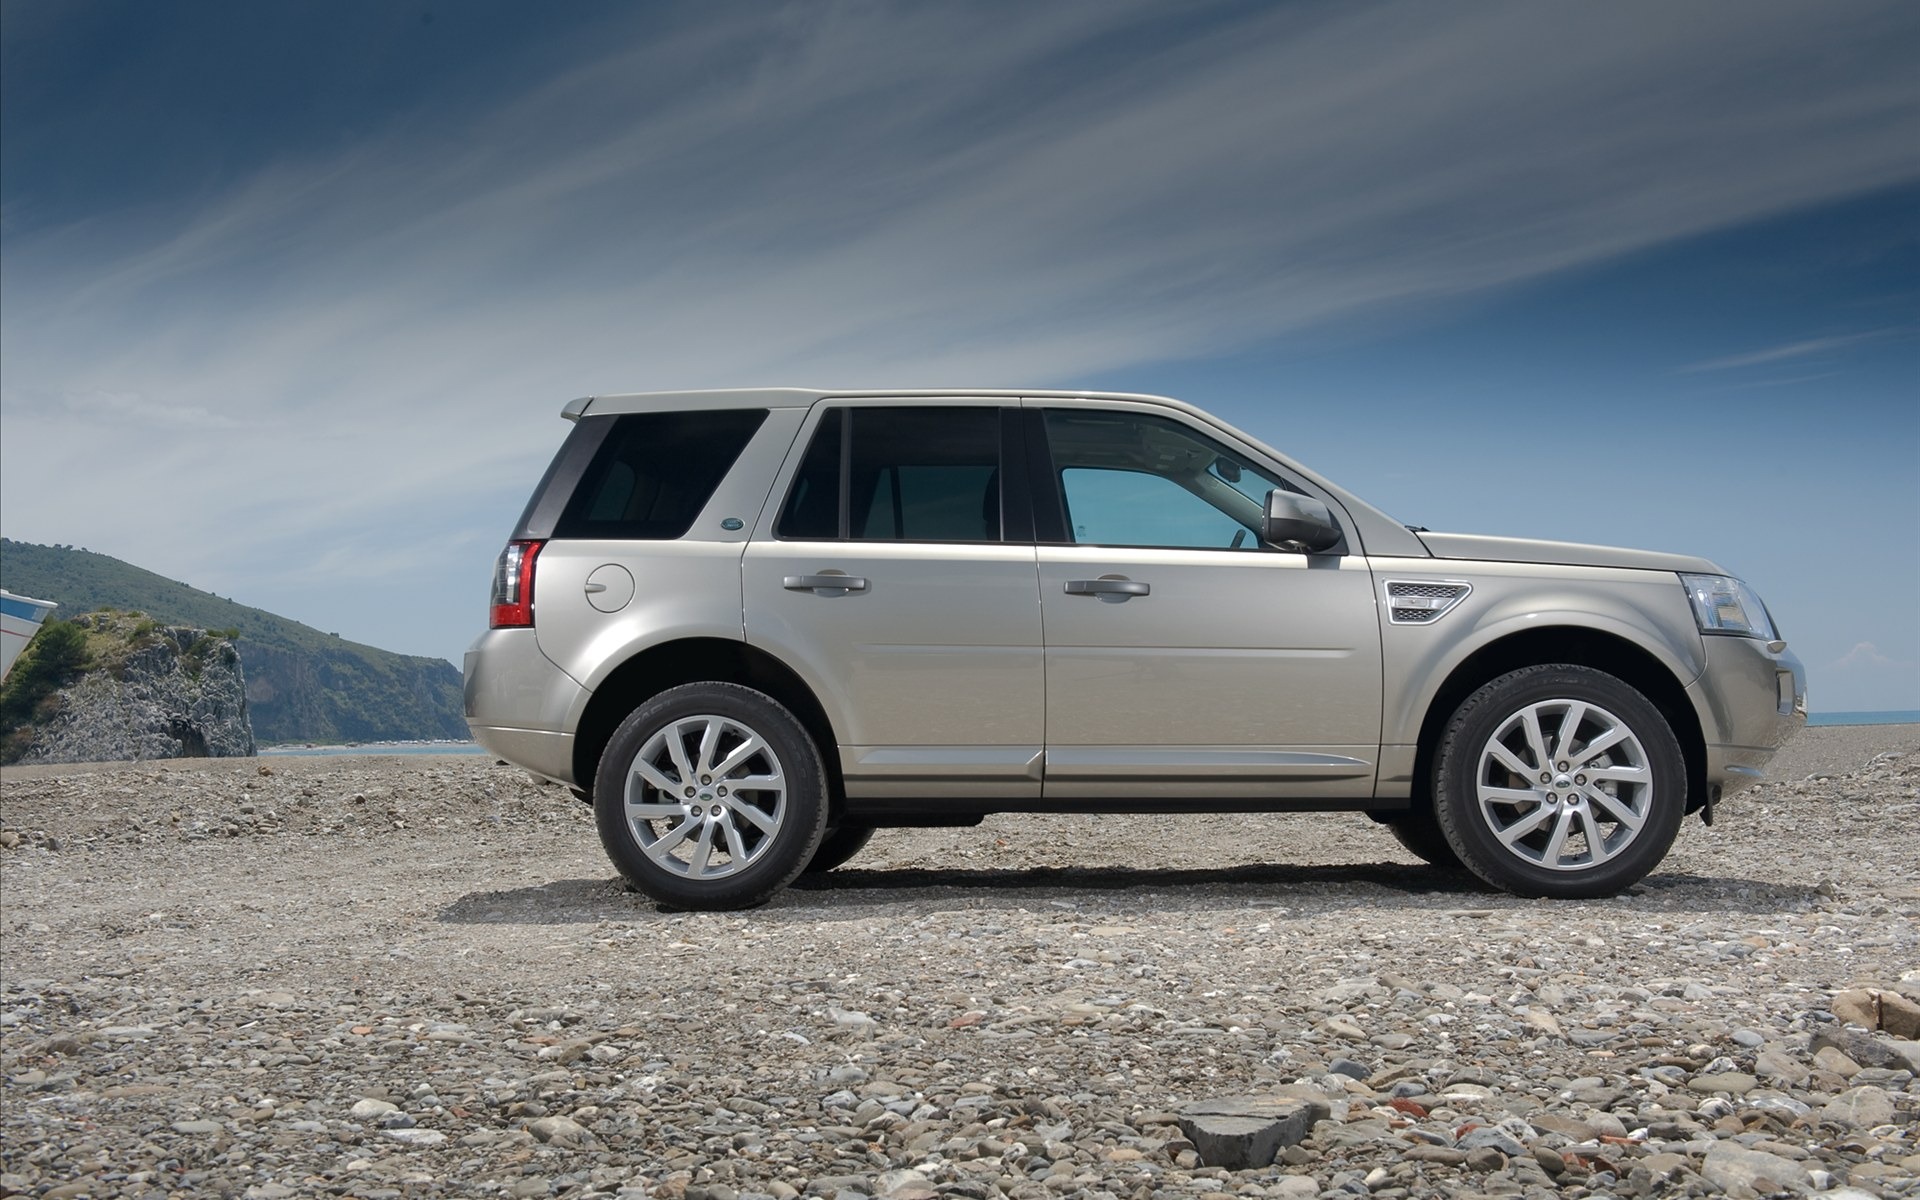 Land Rover wallpapers 2011 (1) #8 - 1920x1200